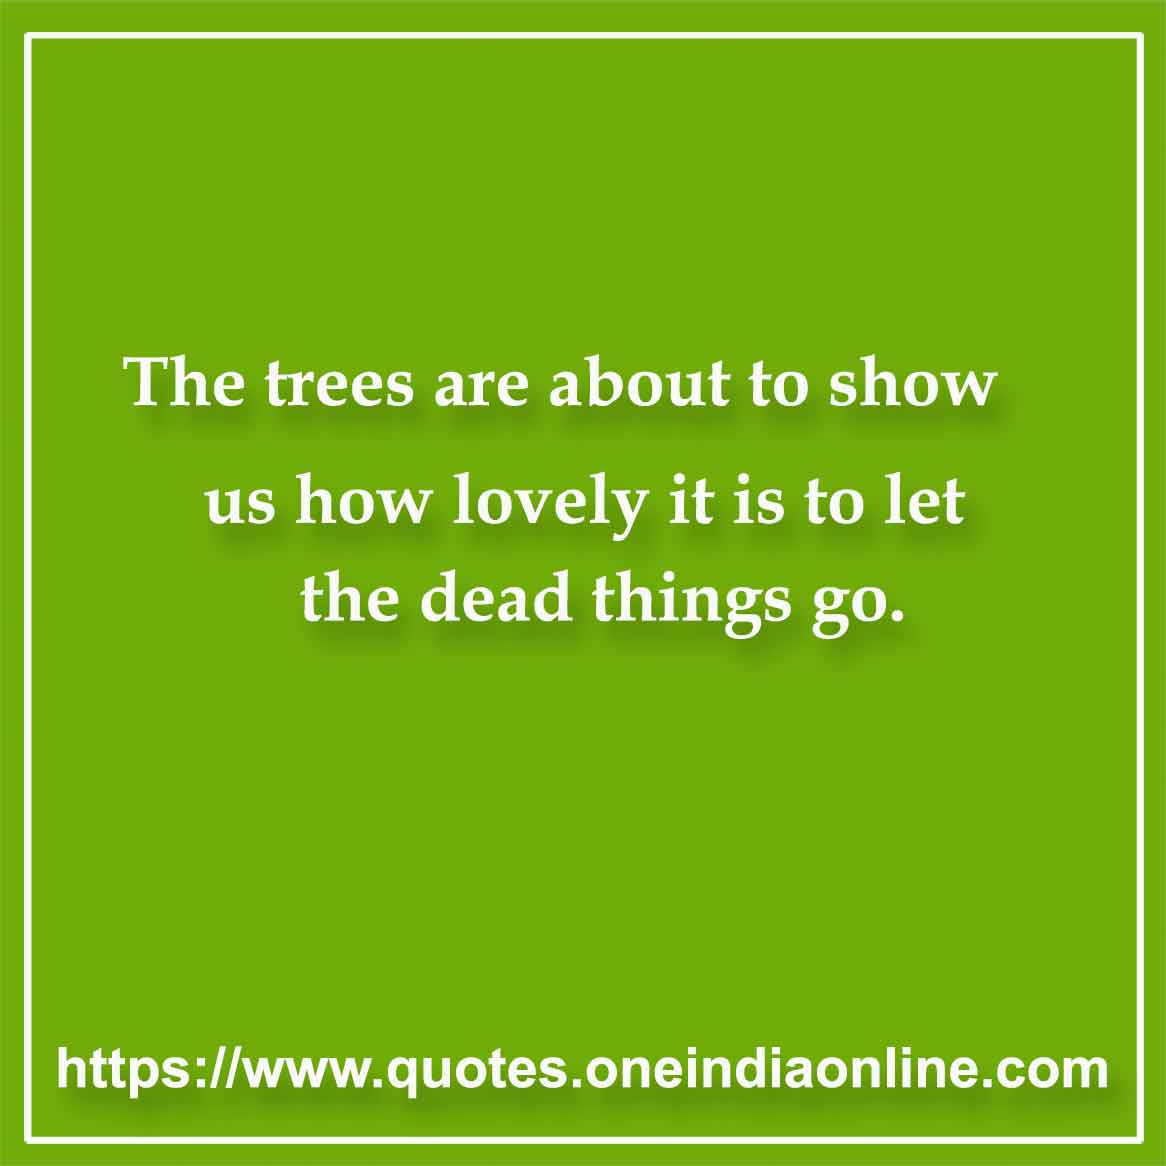 The trees are about to show us how lovely it is to let the dead things go.